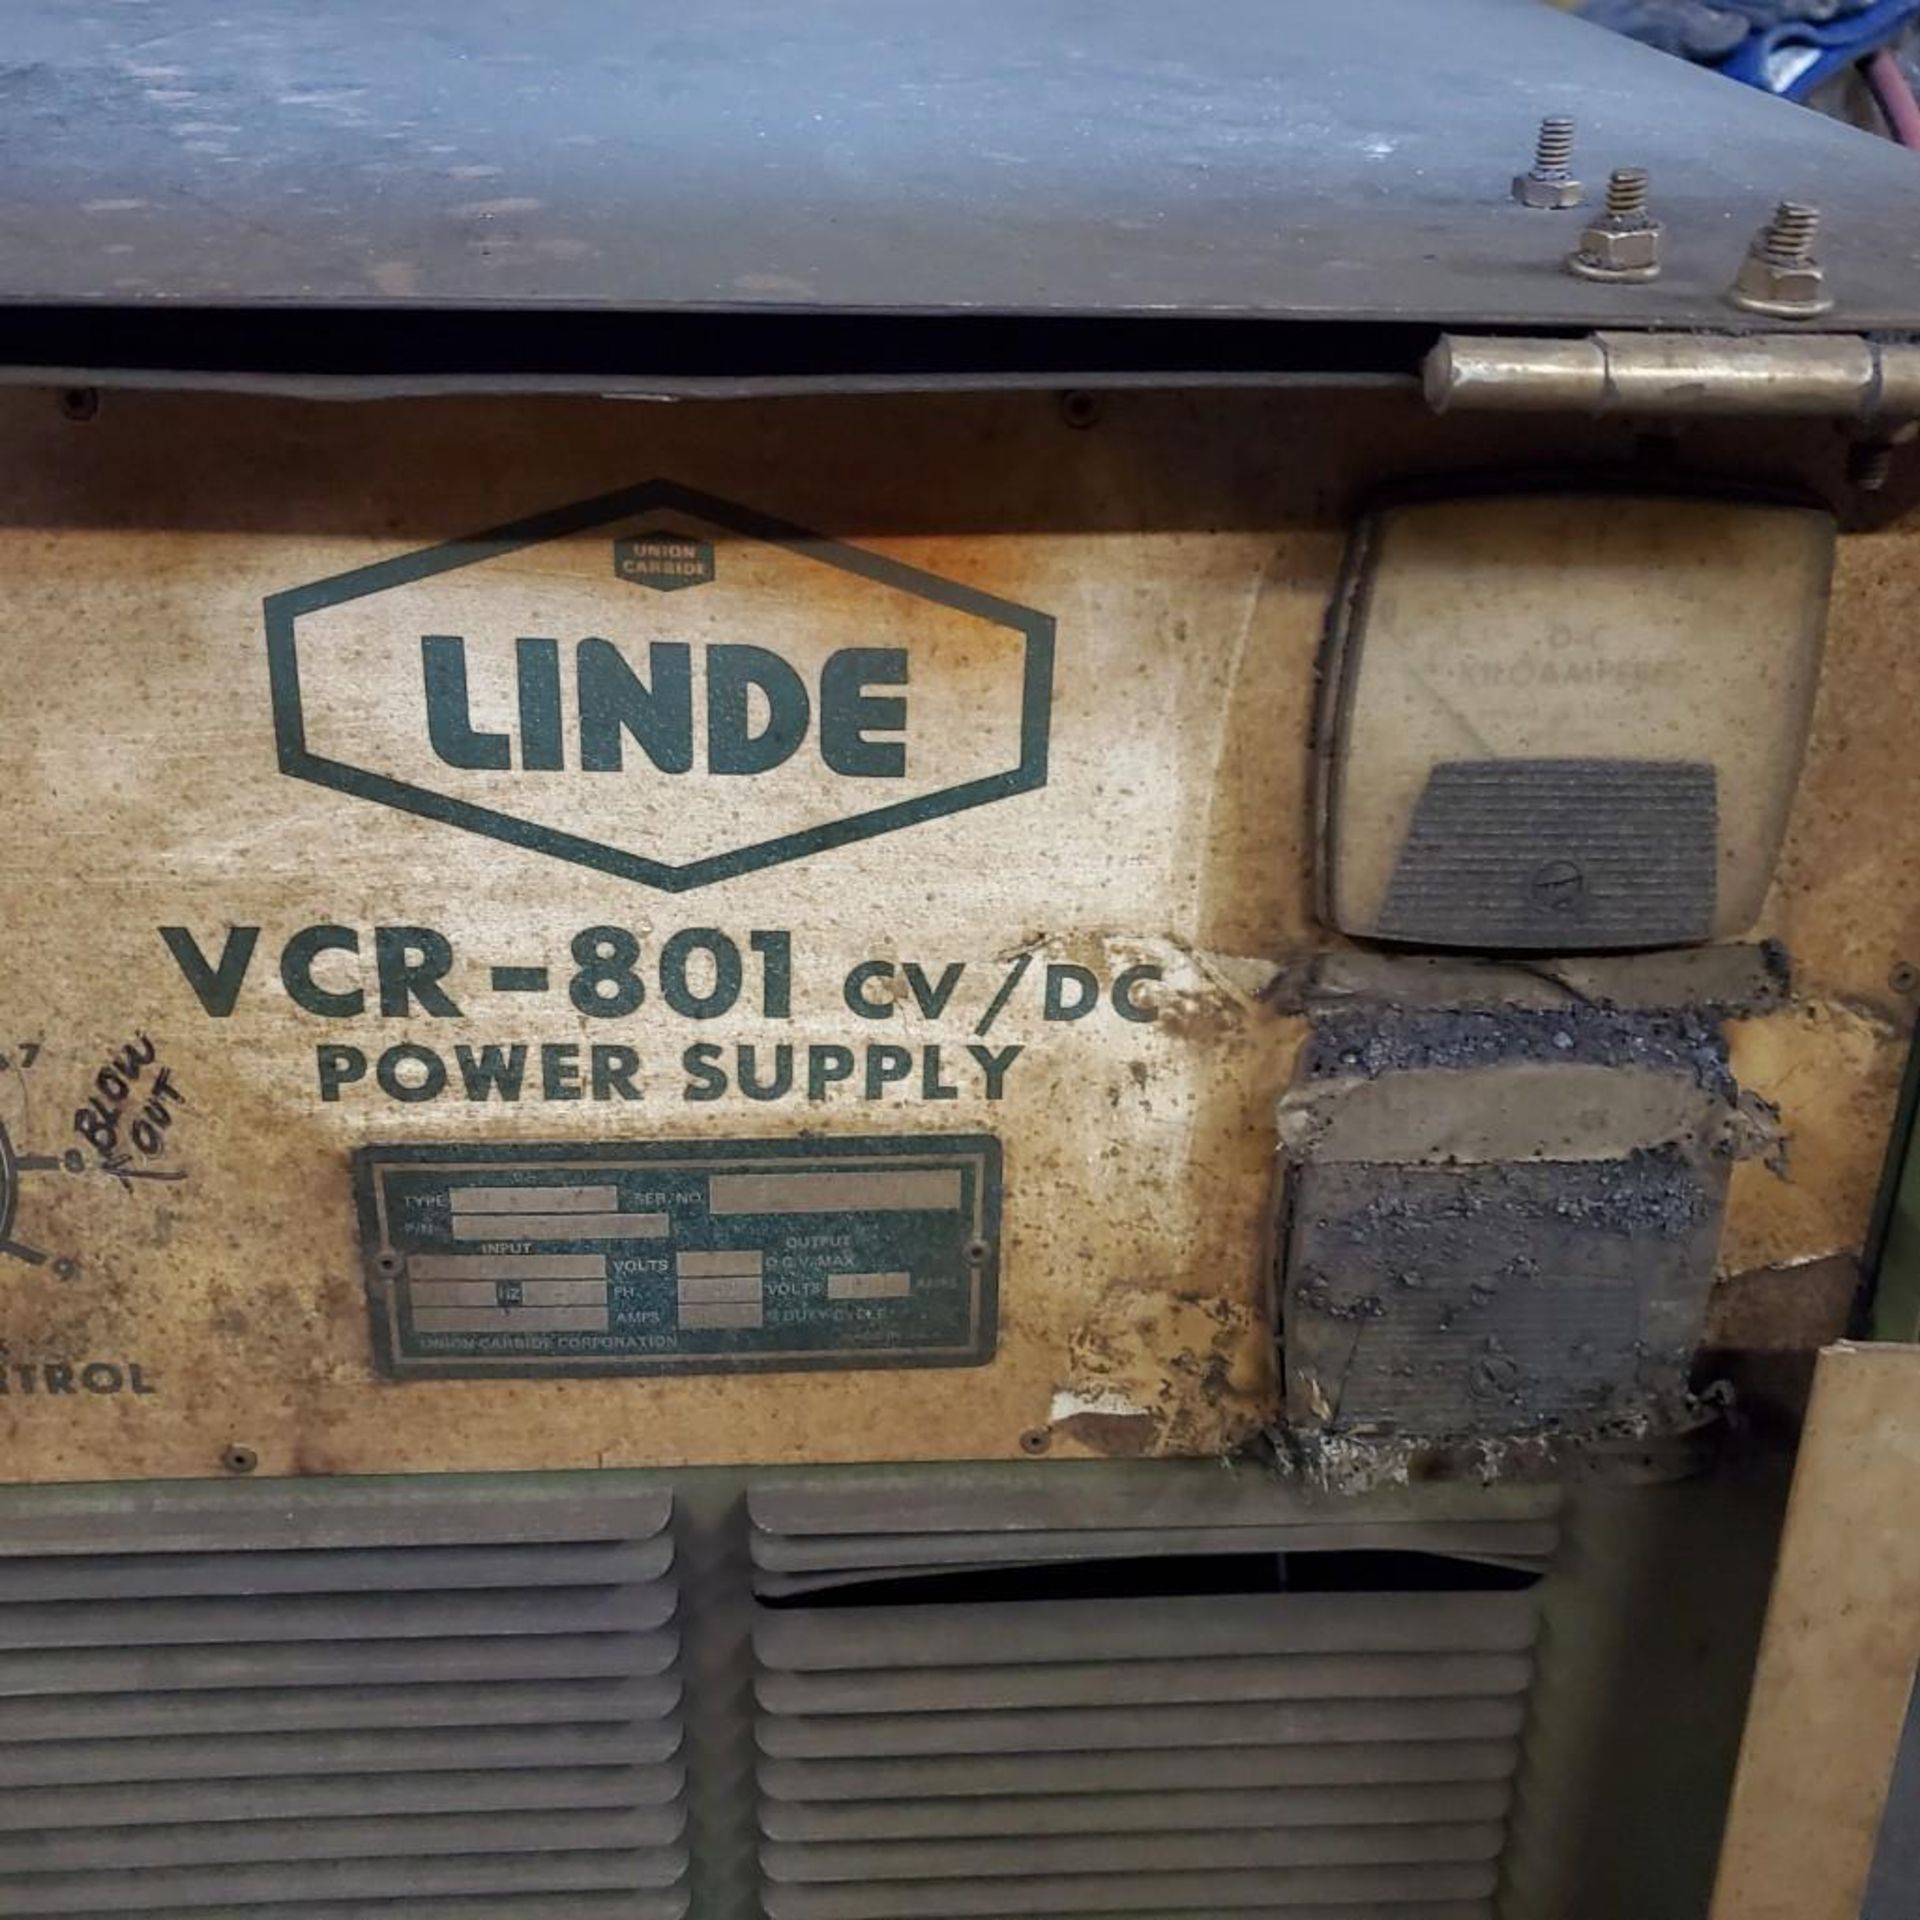 LINDE WELDER POWER SUPPLY, AIR PEENER, MILLER WIRE FEED TORCH AND WELDING SYSTEM, AIR ARC BLAST - Image 7 of 28